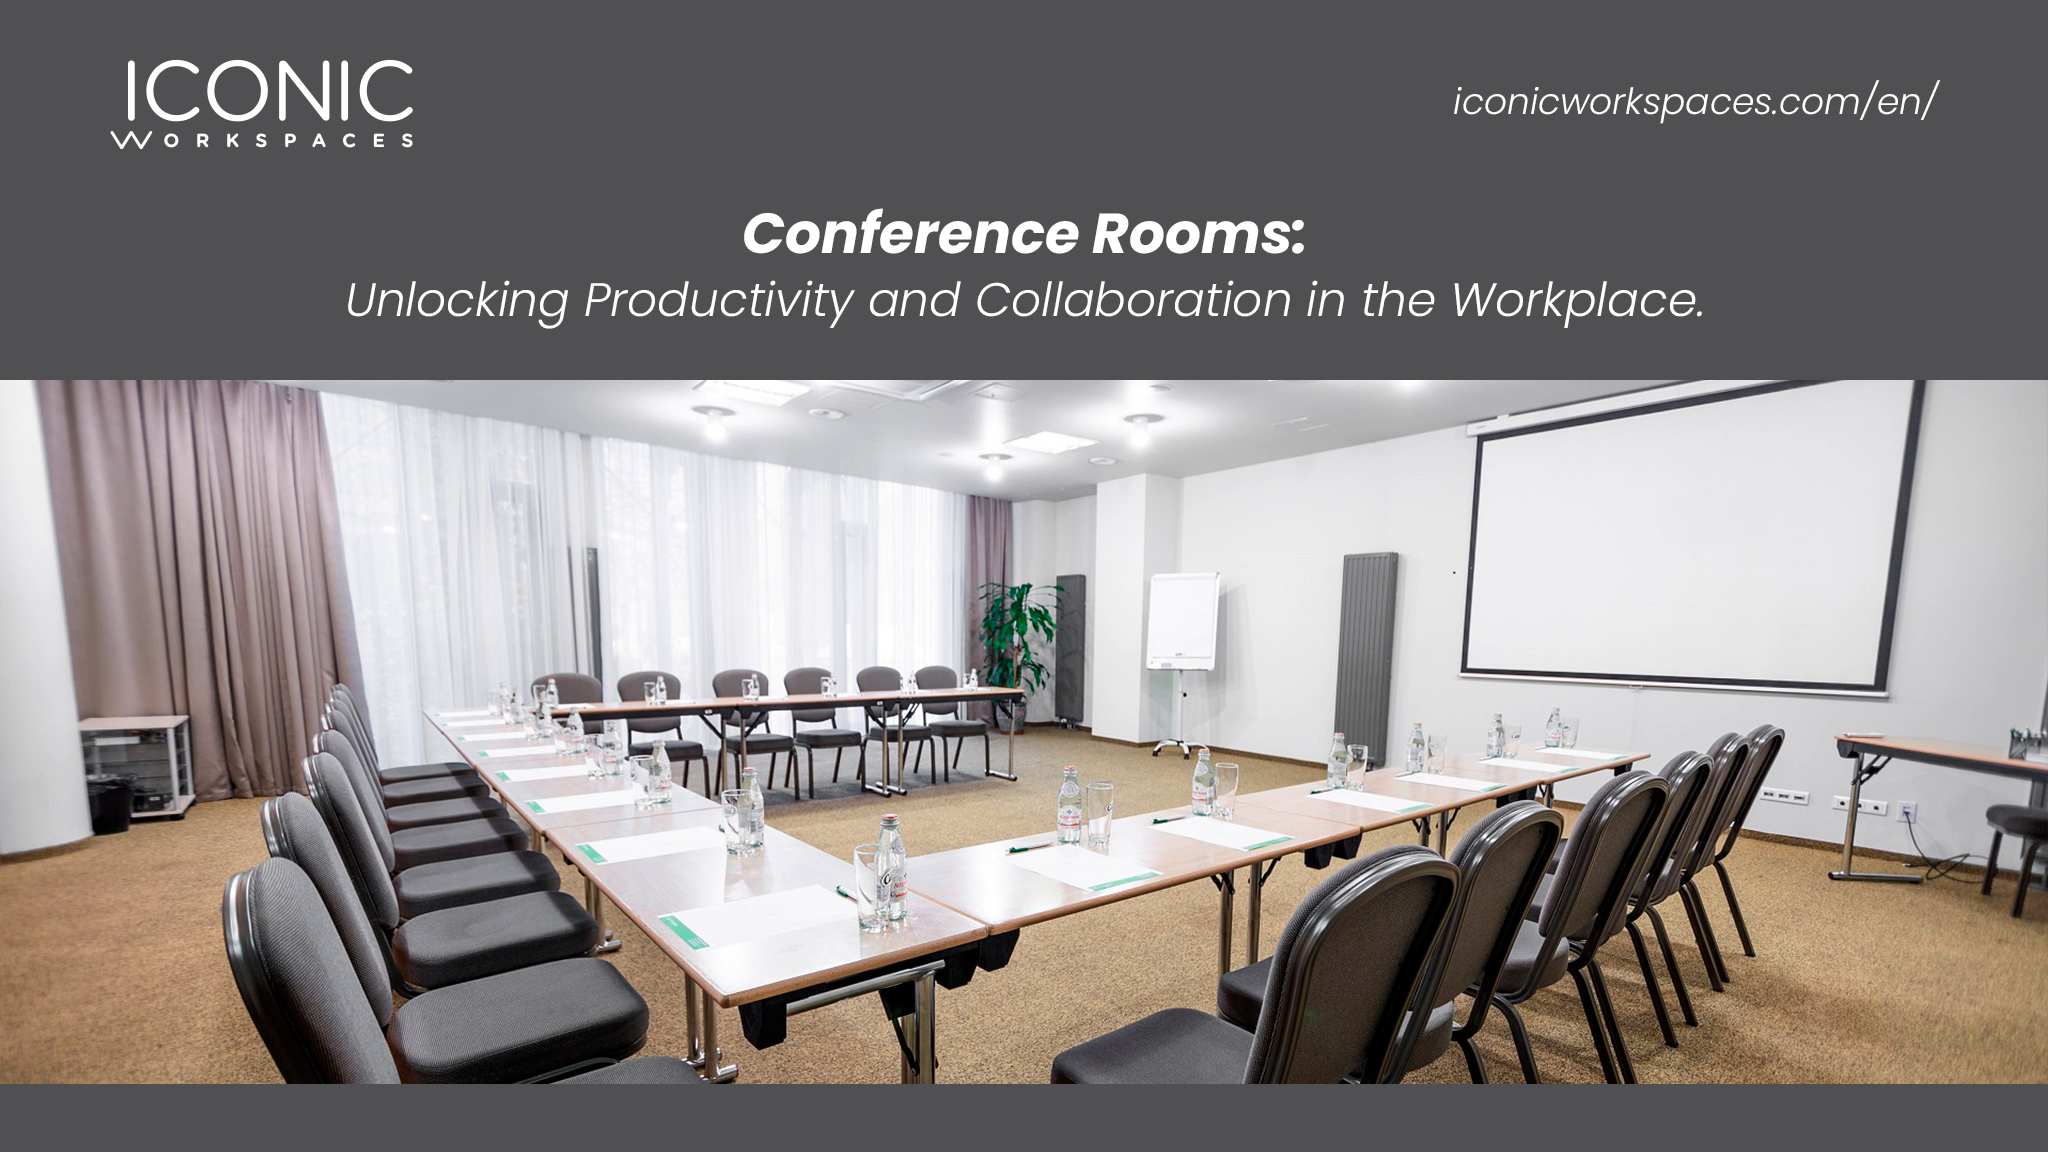 Conference Room: Unlocking Productivity and Collaboration in the Workplace